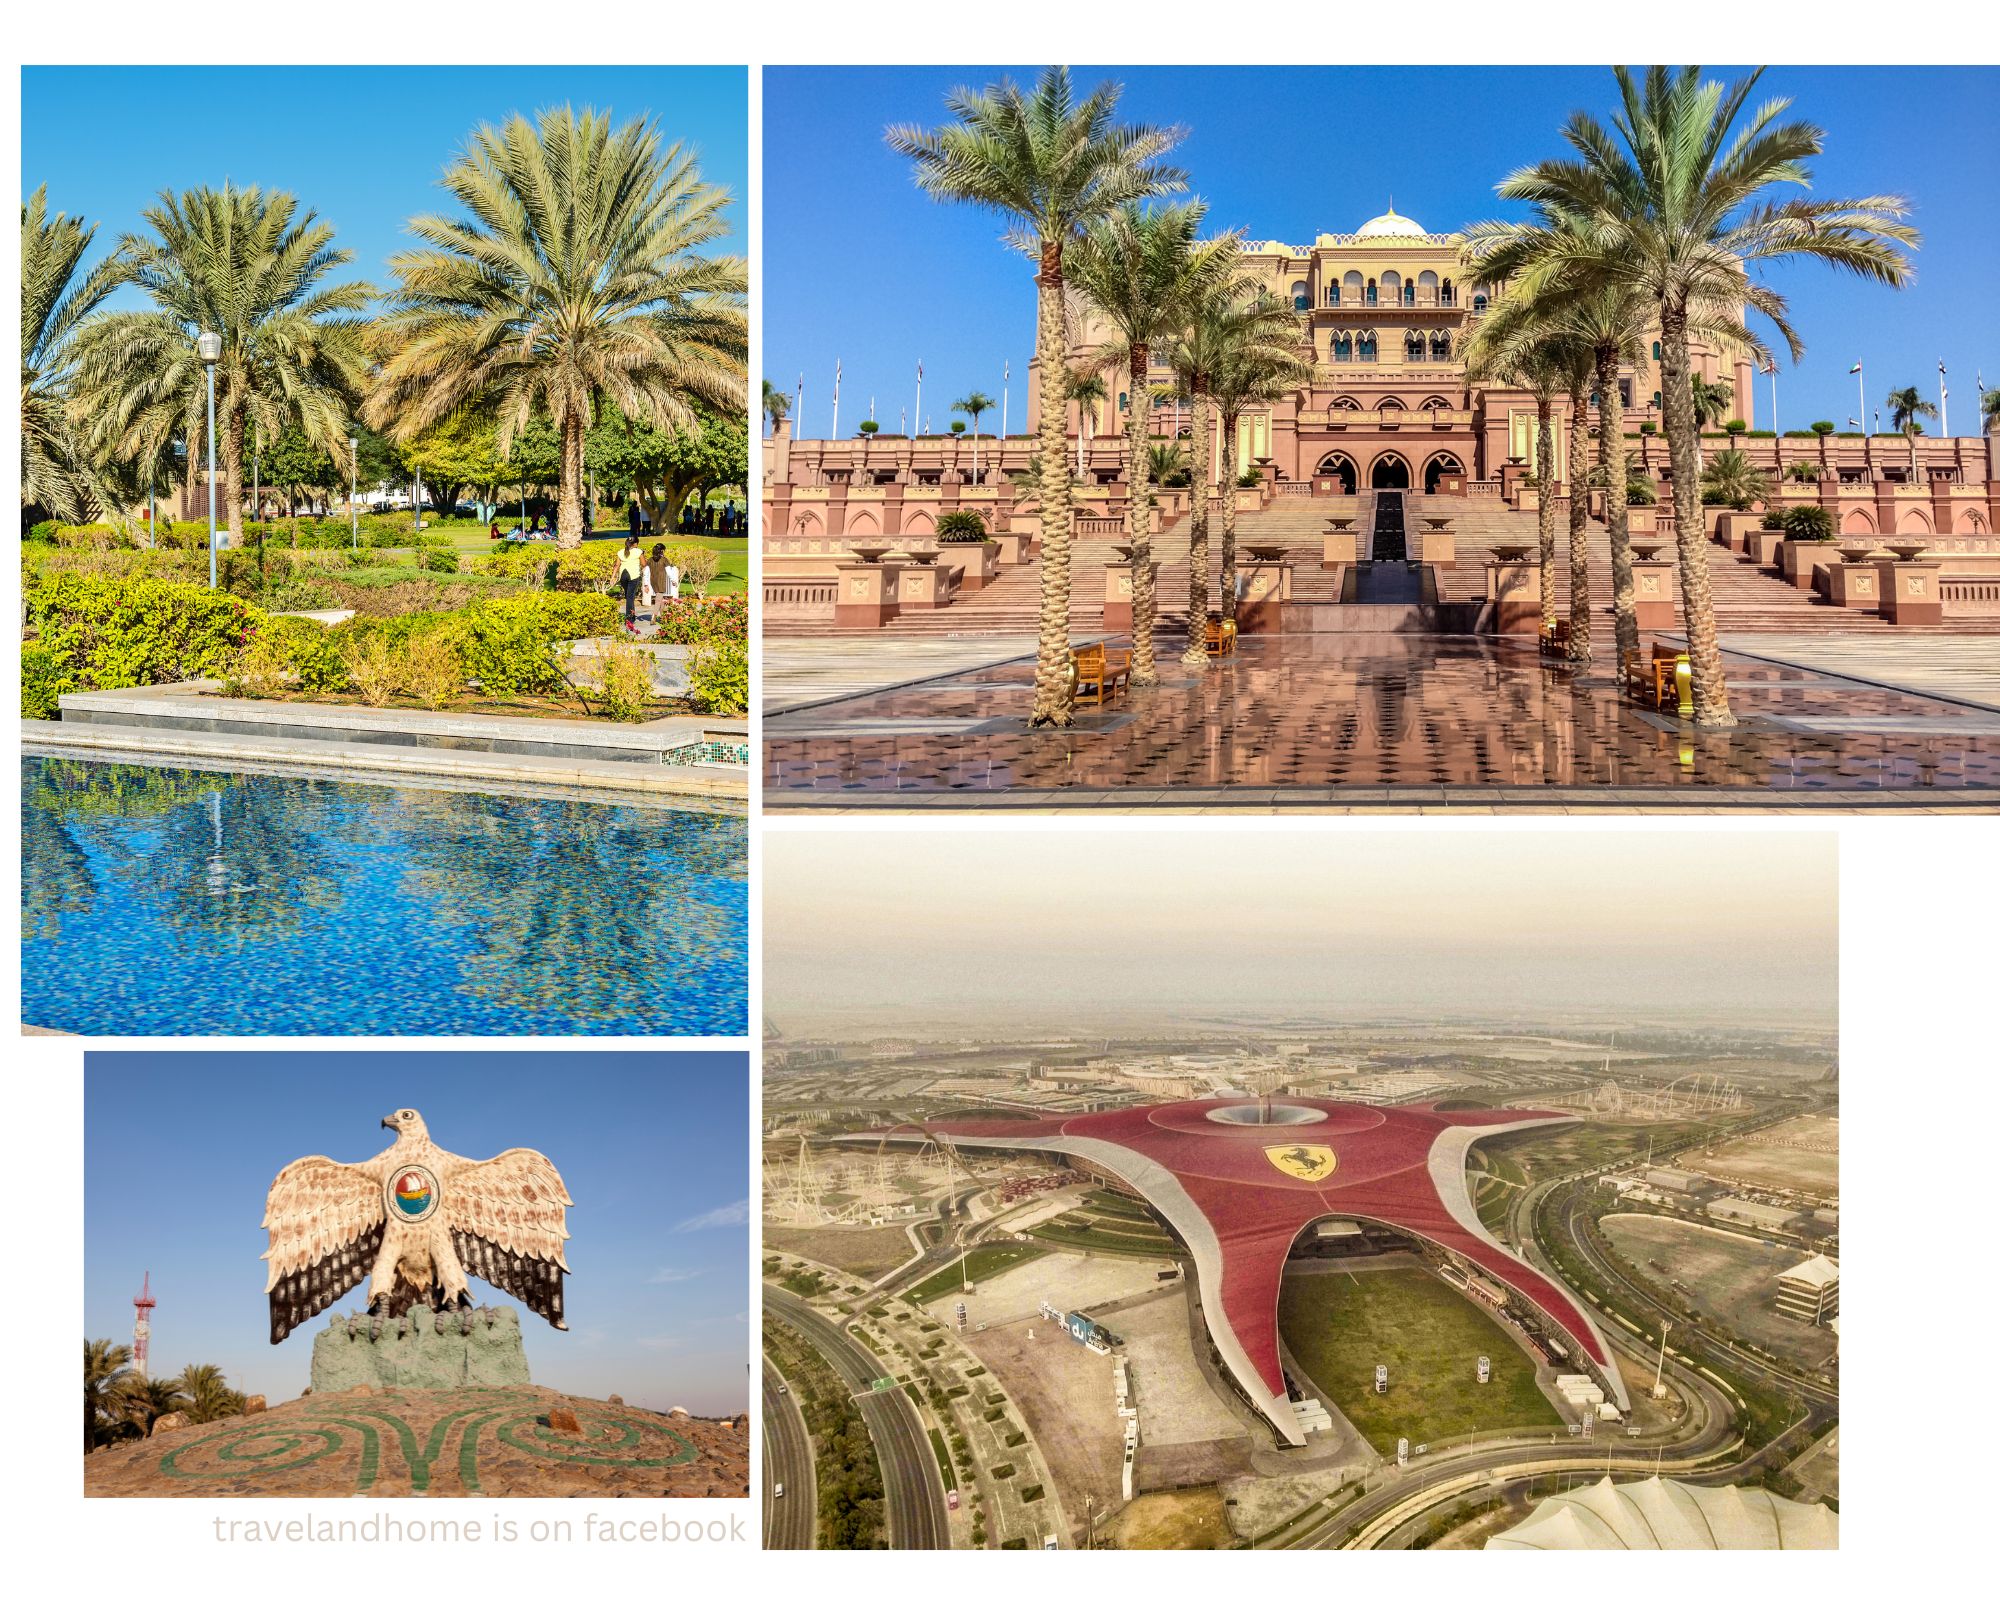 Best things to do in Abu Dhabi, travel and home, ferrari world, falcon hospital, emirates palace, al ain oasis